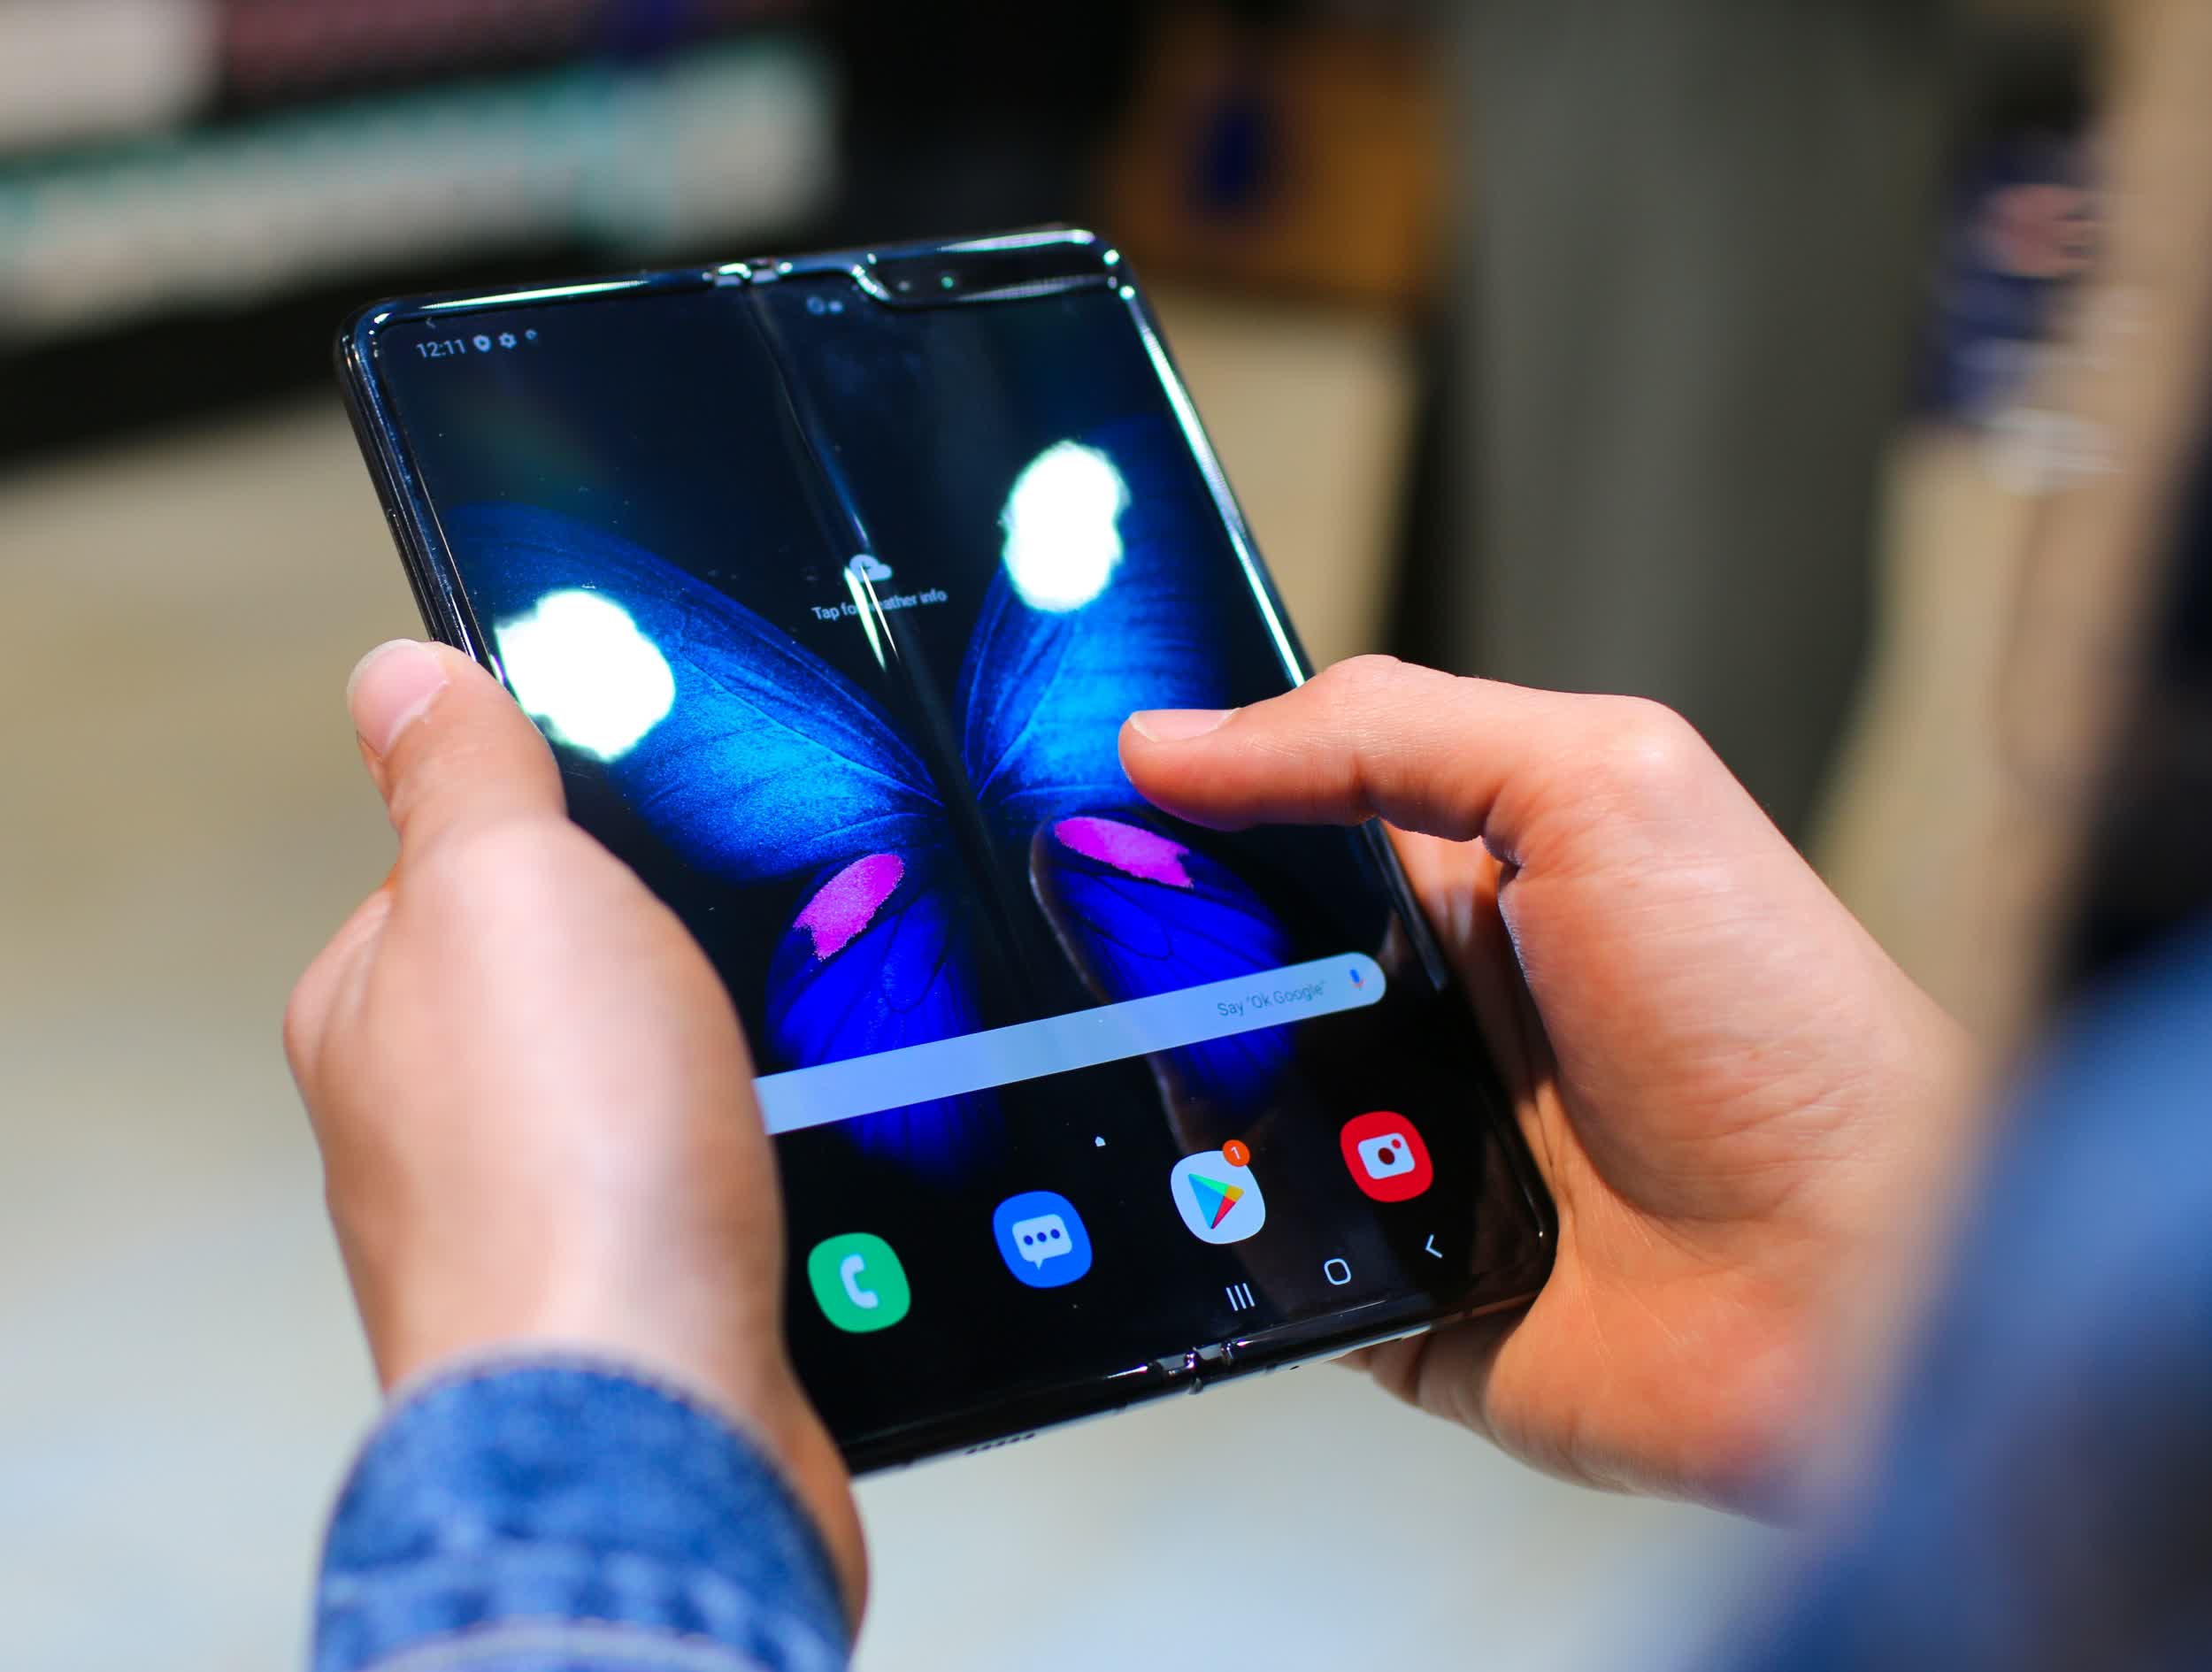 Samsung orchestrated a record quarter for foldable smartphones